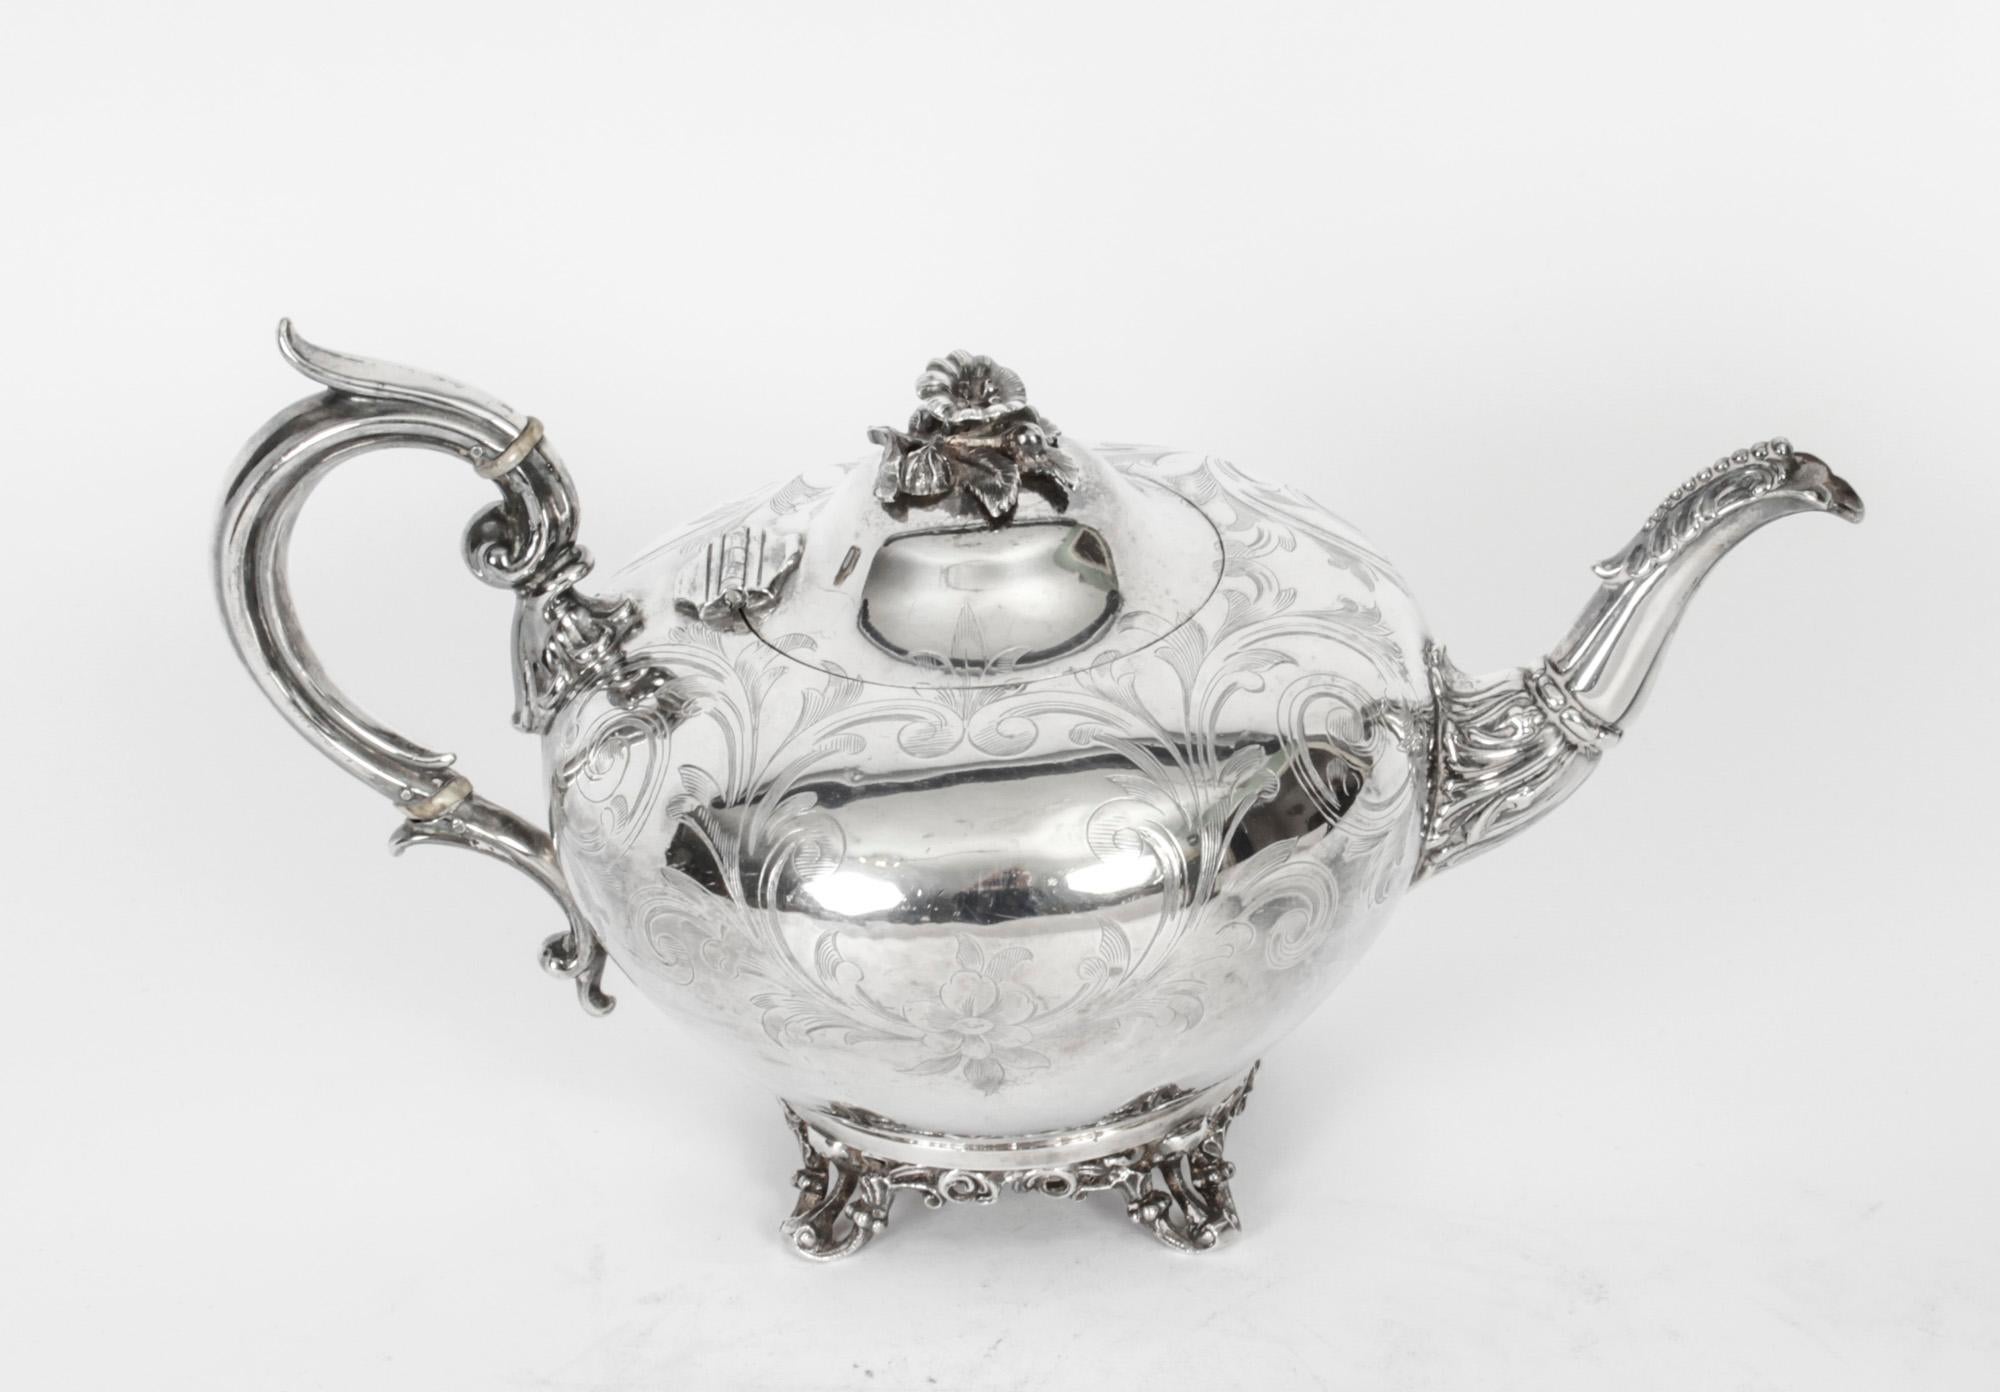 An exquisite antique English Victorian silver plate teapot, with the makers mark of the renowned silversmith Elkington & Co, Circa 1880 in date.

The teapot has a plain circular rounded form sitting on four cast foliate feet. The surface of the